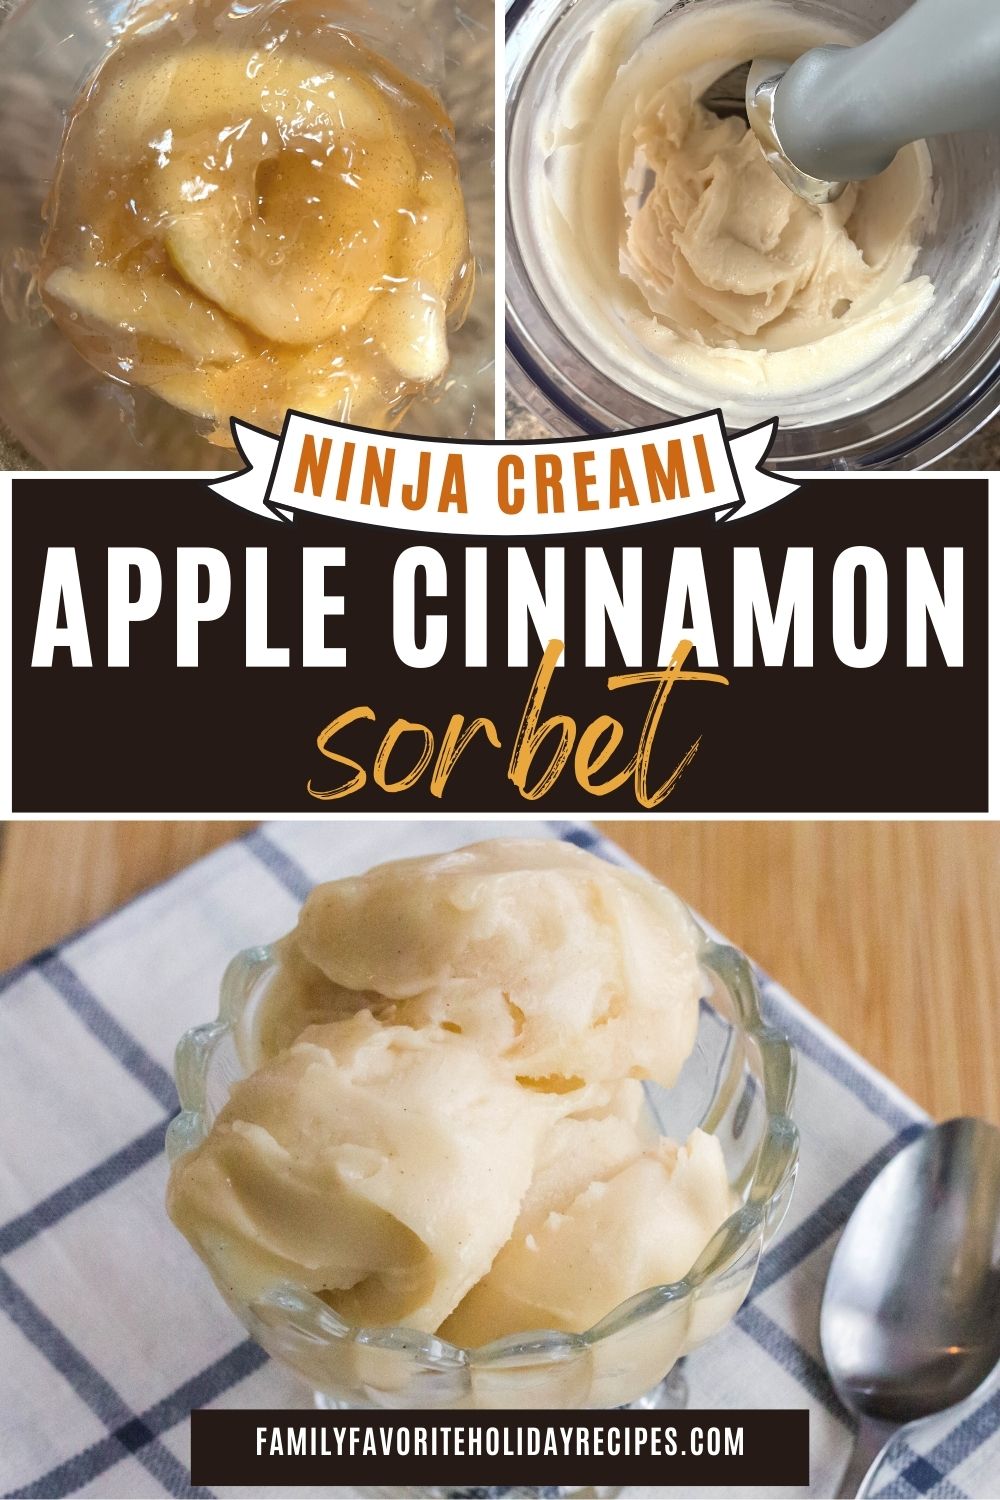 3 photos showing different views of apple cinnamon sorbet made in the ninja creami